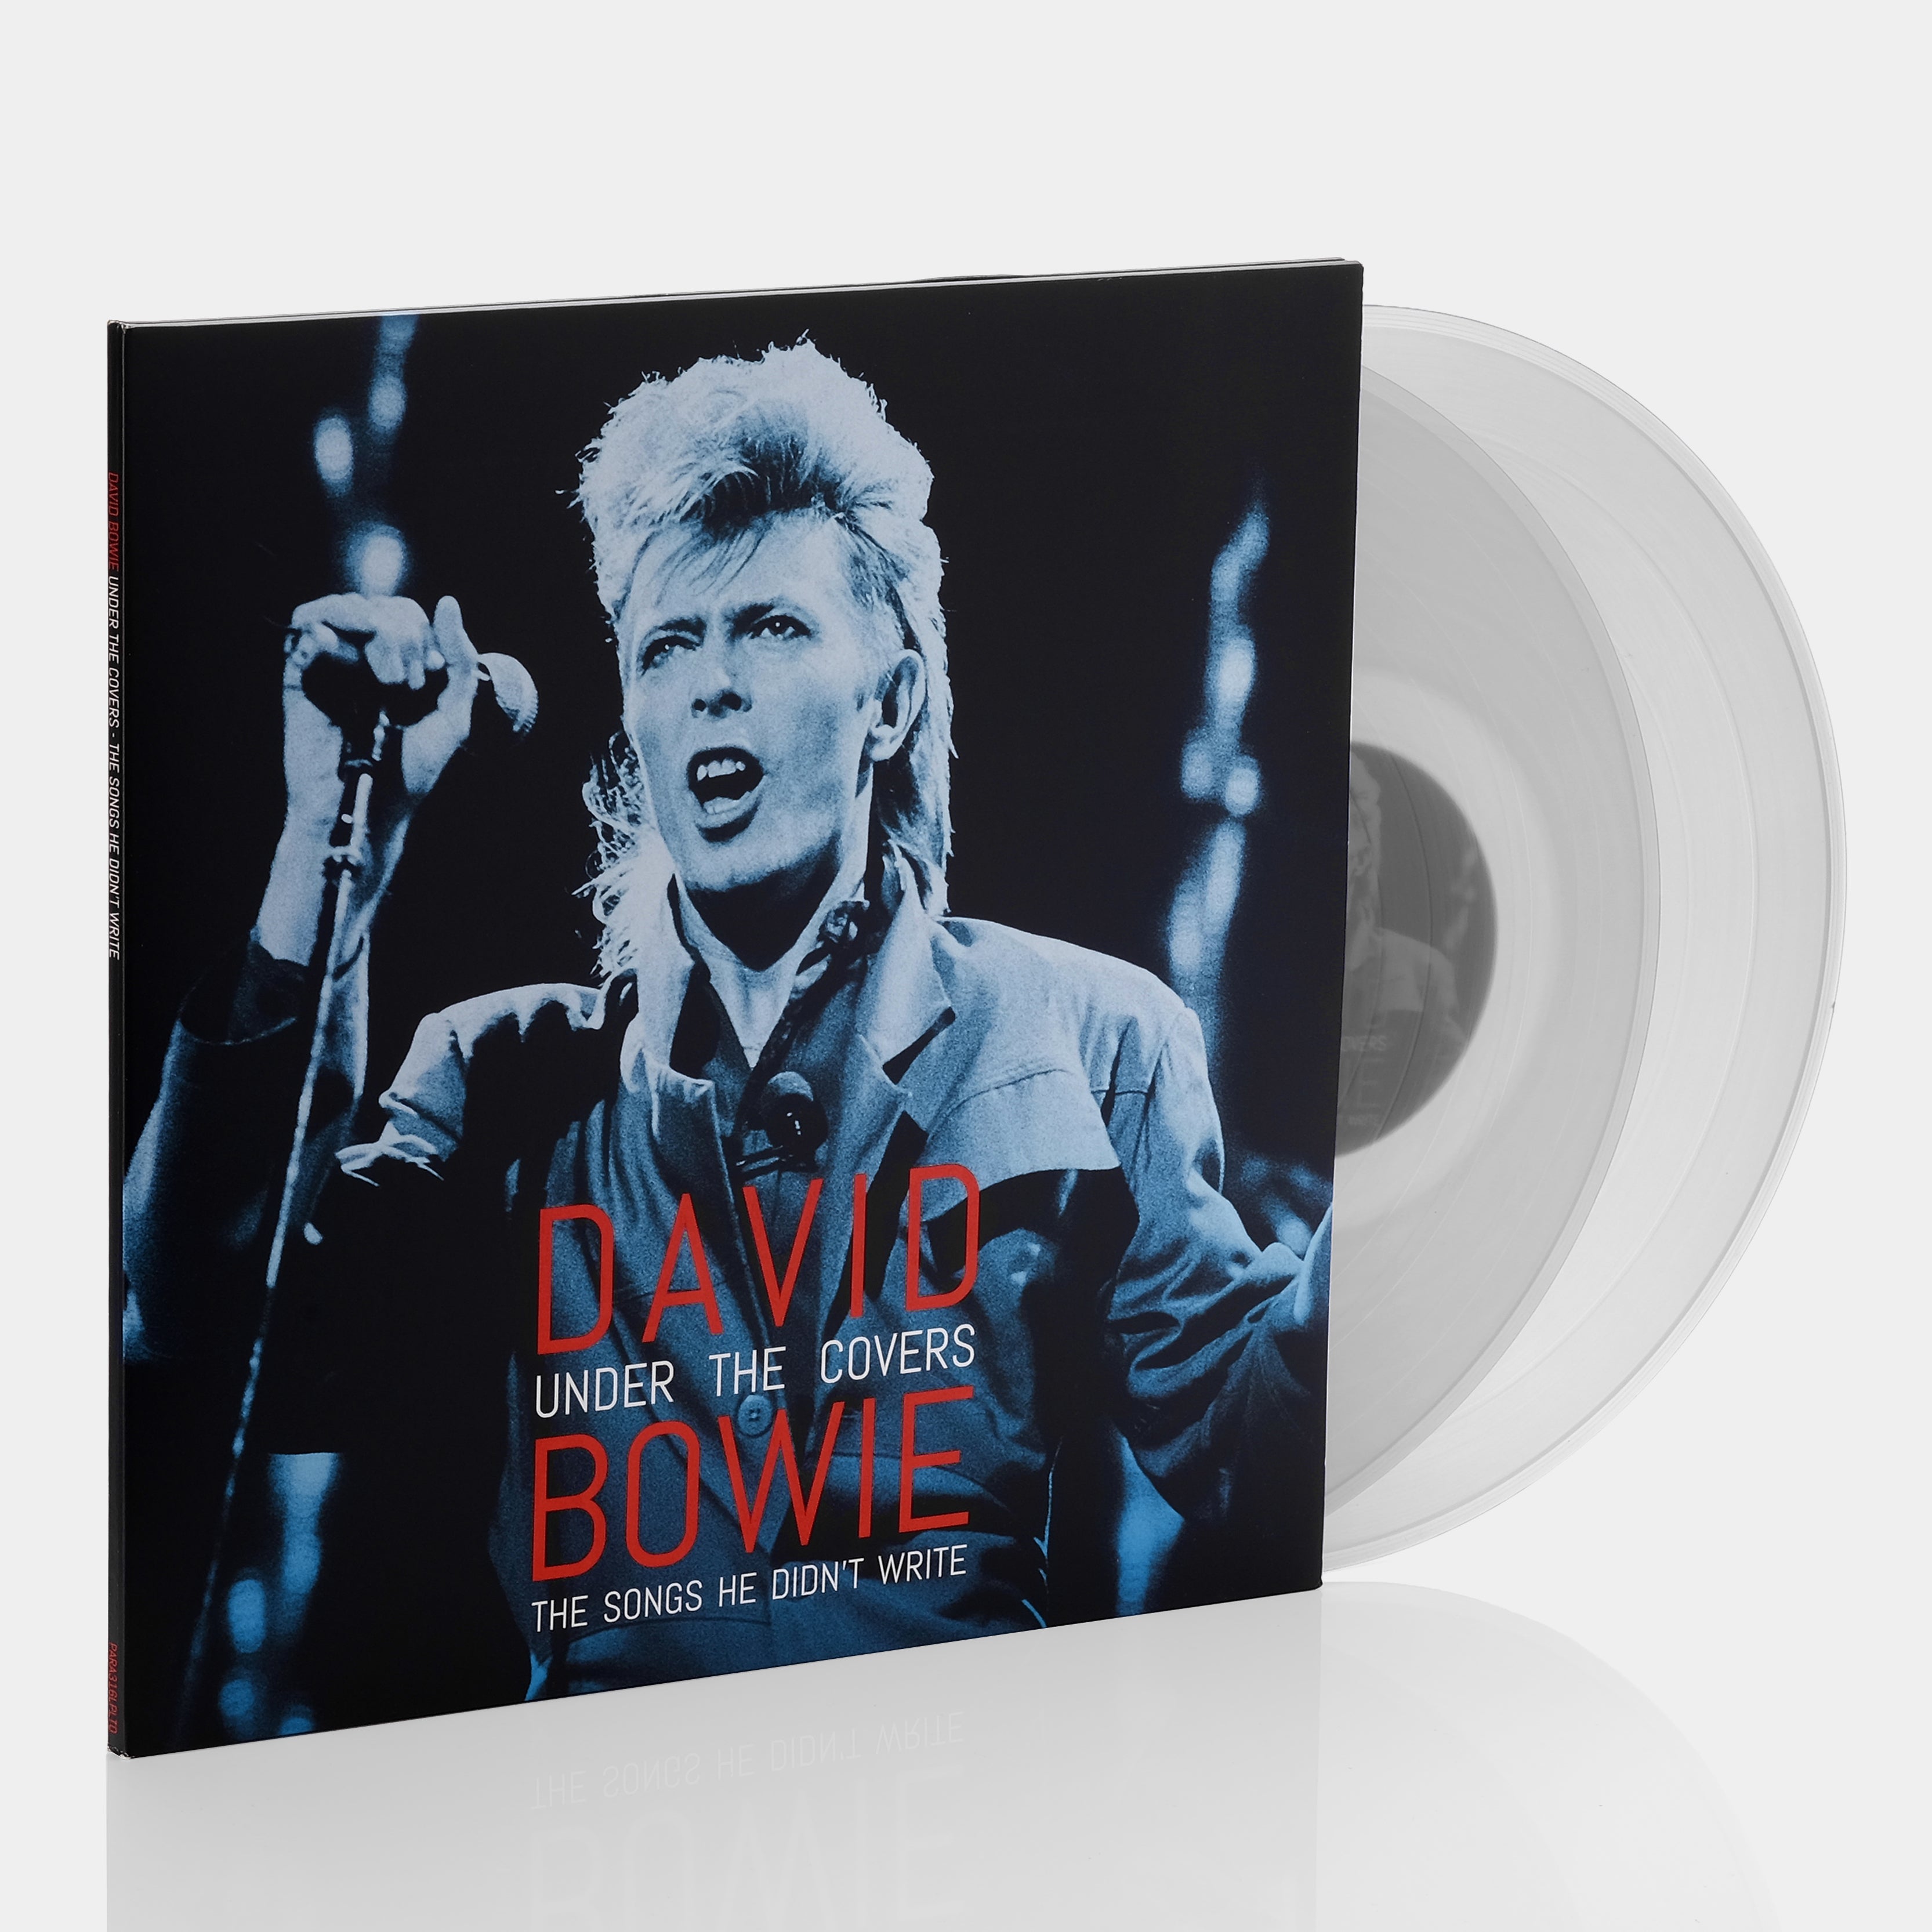 David Bowie - Under The Covers (The Songs He Didn't Write) 2xLP Clear Vinyl Record